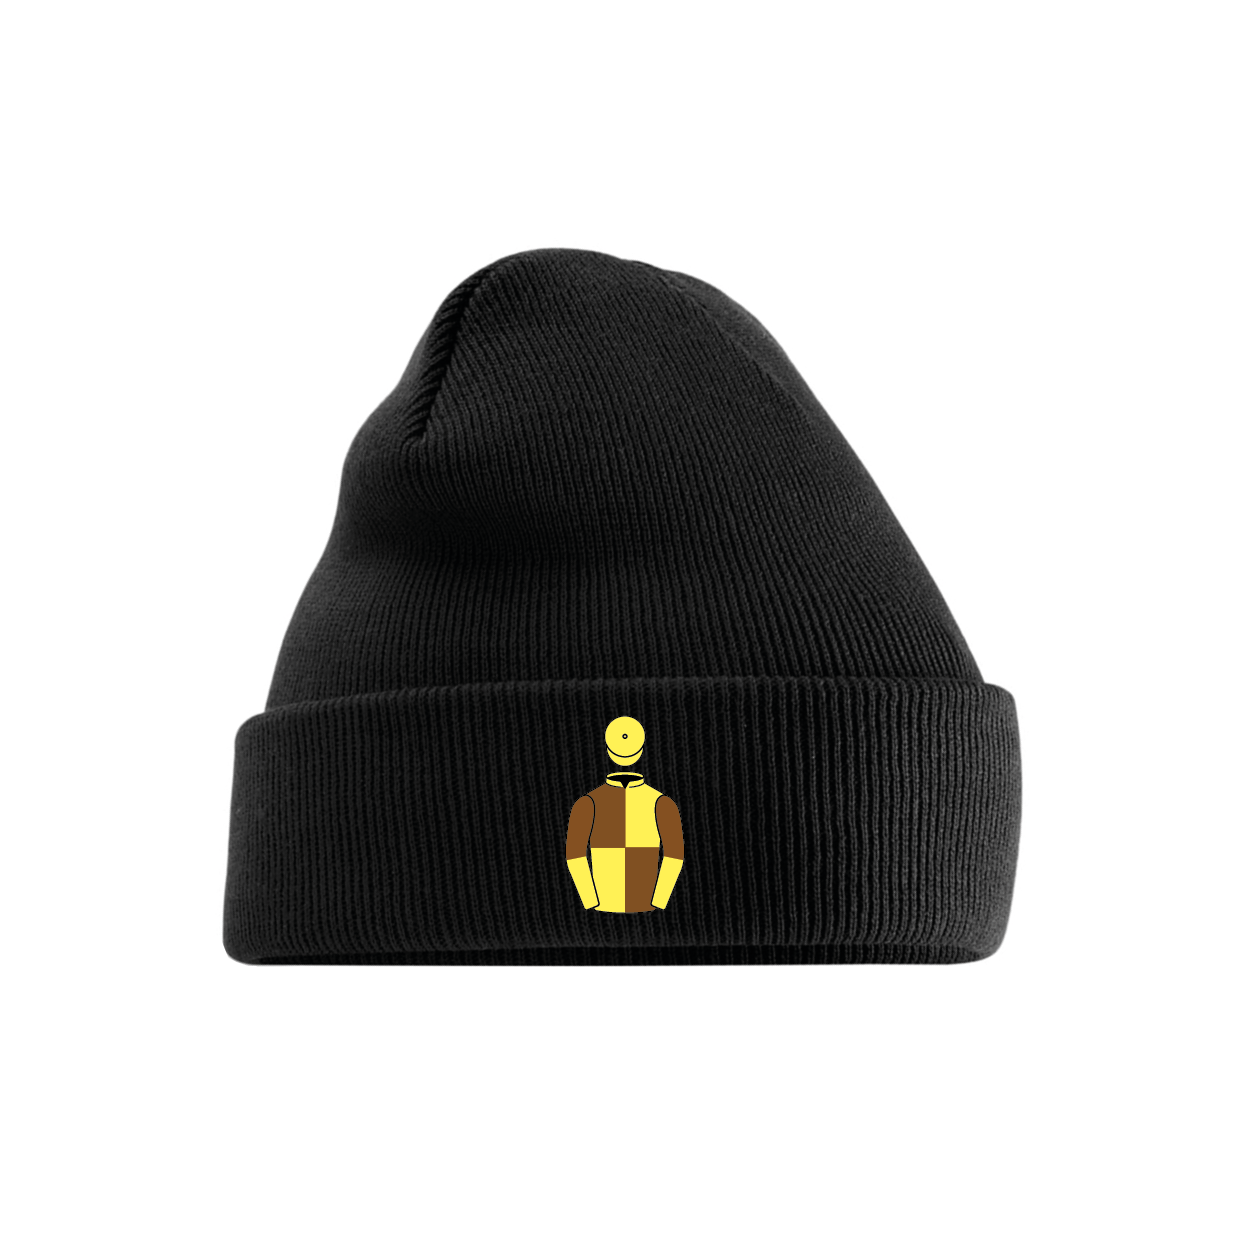 Audrey Turley Embroidered Cuffed Beanie - Hacked Up